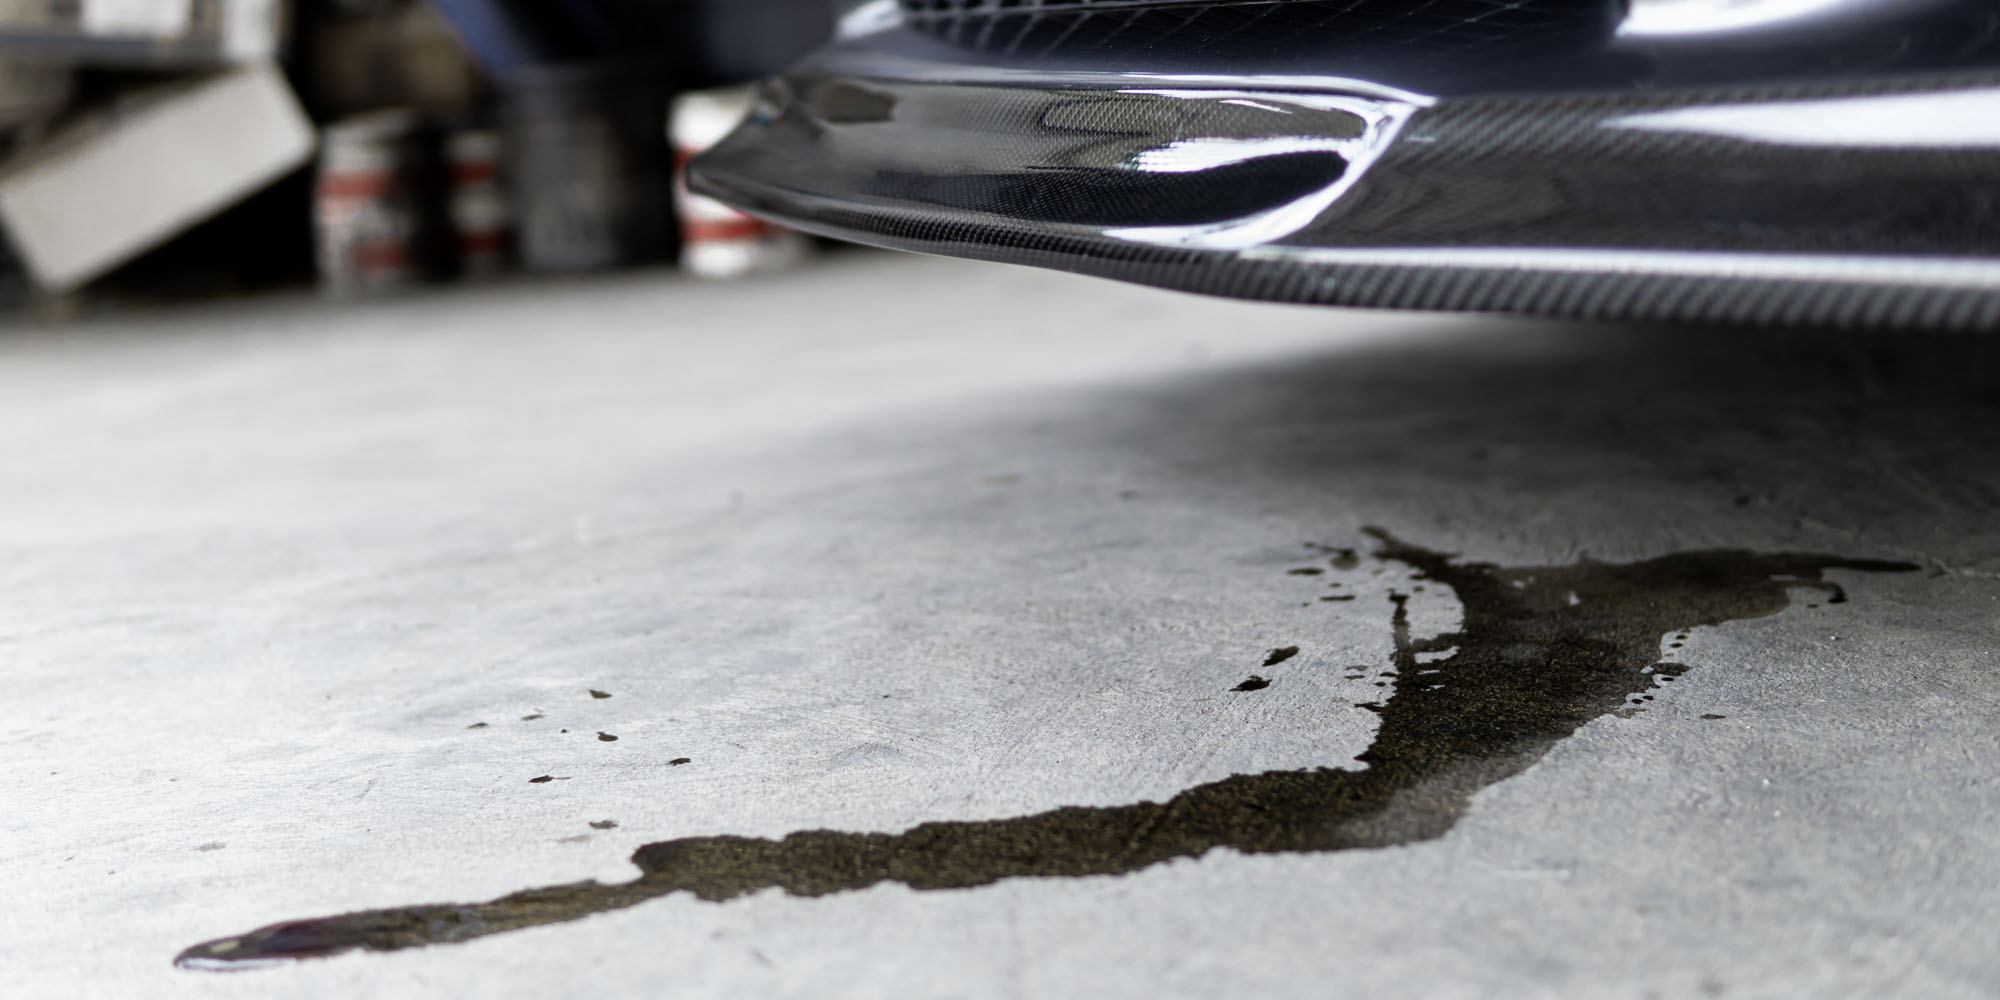 How To Remove Power Steering Fluid From A Driveway